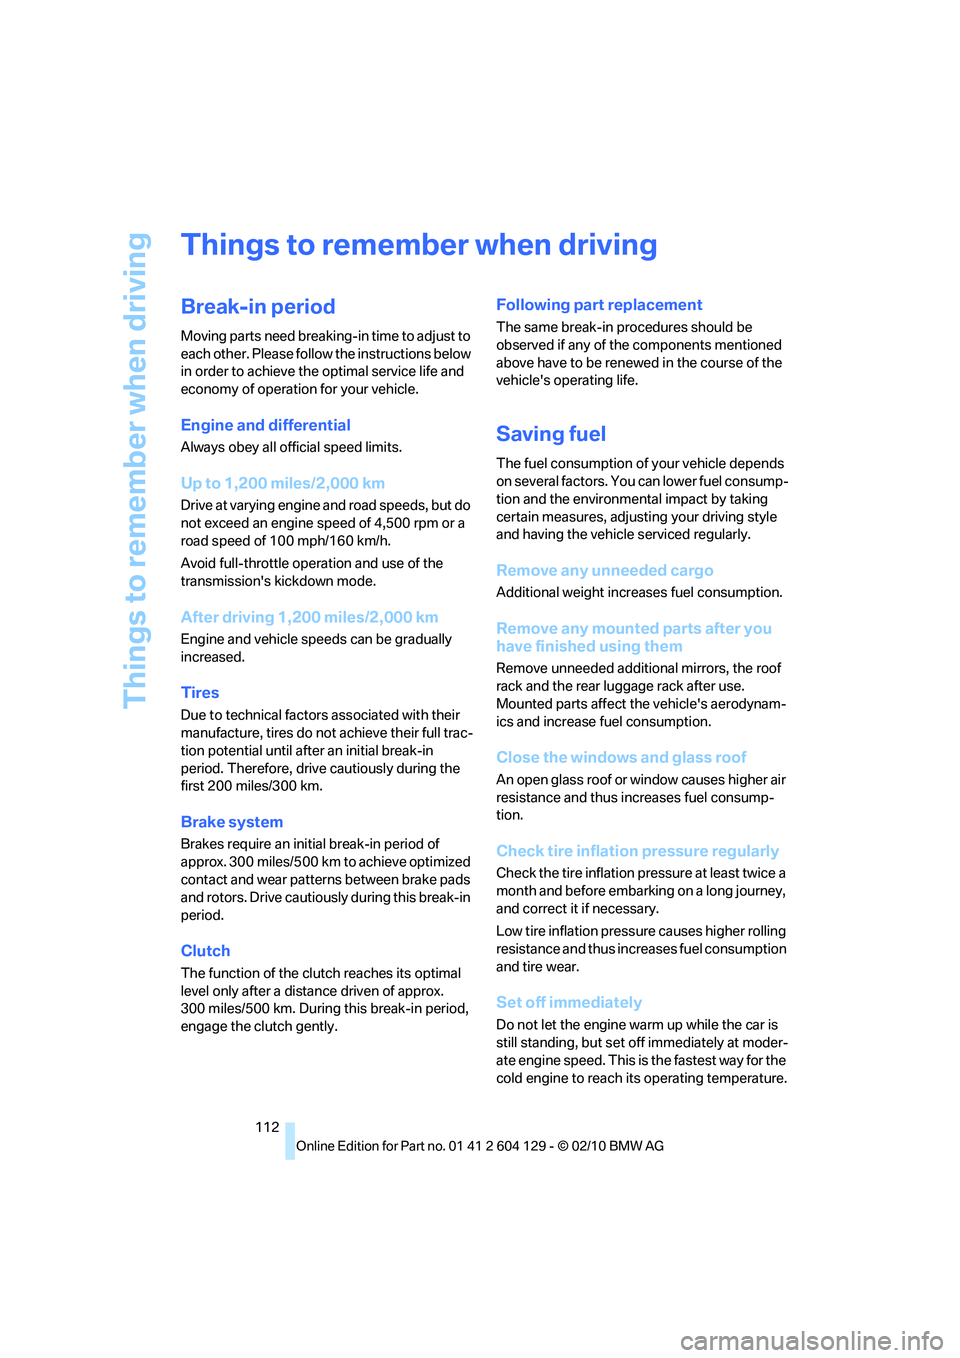 BMW 1 SERIES 2011  Owners Manual Things to remember when driving
112
Things to remember when driving
Break-in period
Moving parts need breaking-in time to adjust to 
each other. Please follow the instructions below 
in order to achie